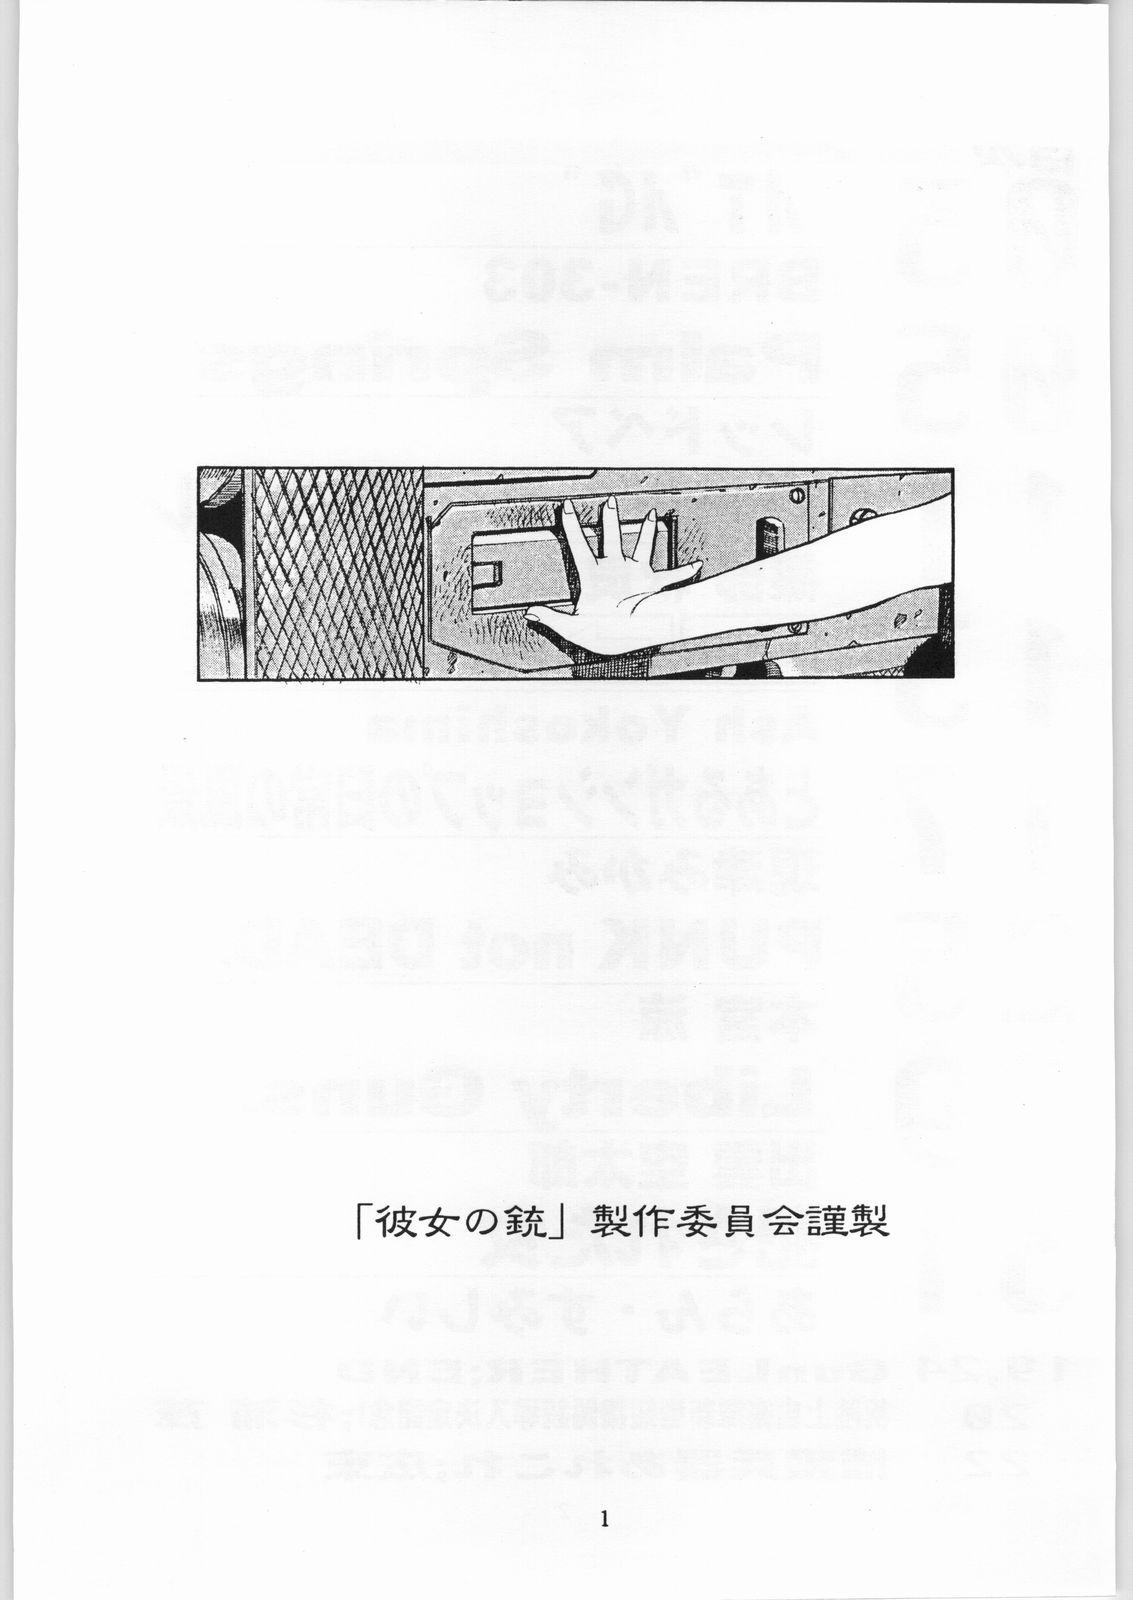 Police Kanojo No Juu - Final fantasy vii Ghost in the shell Pussyeating - Page 2